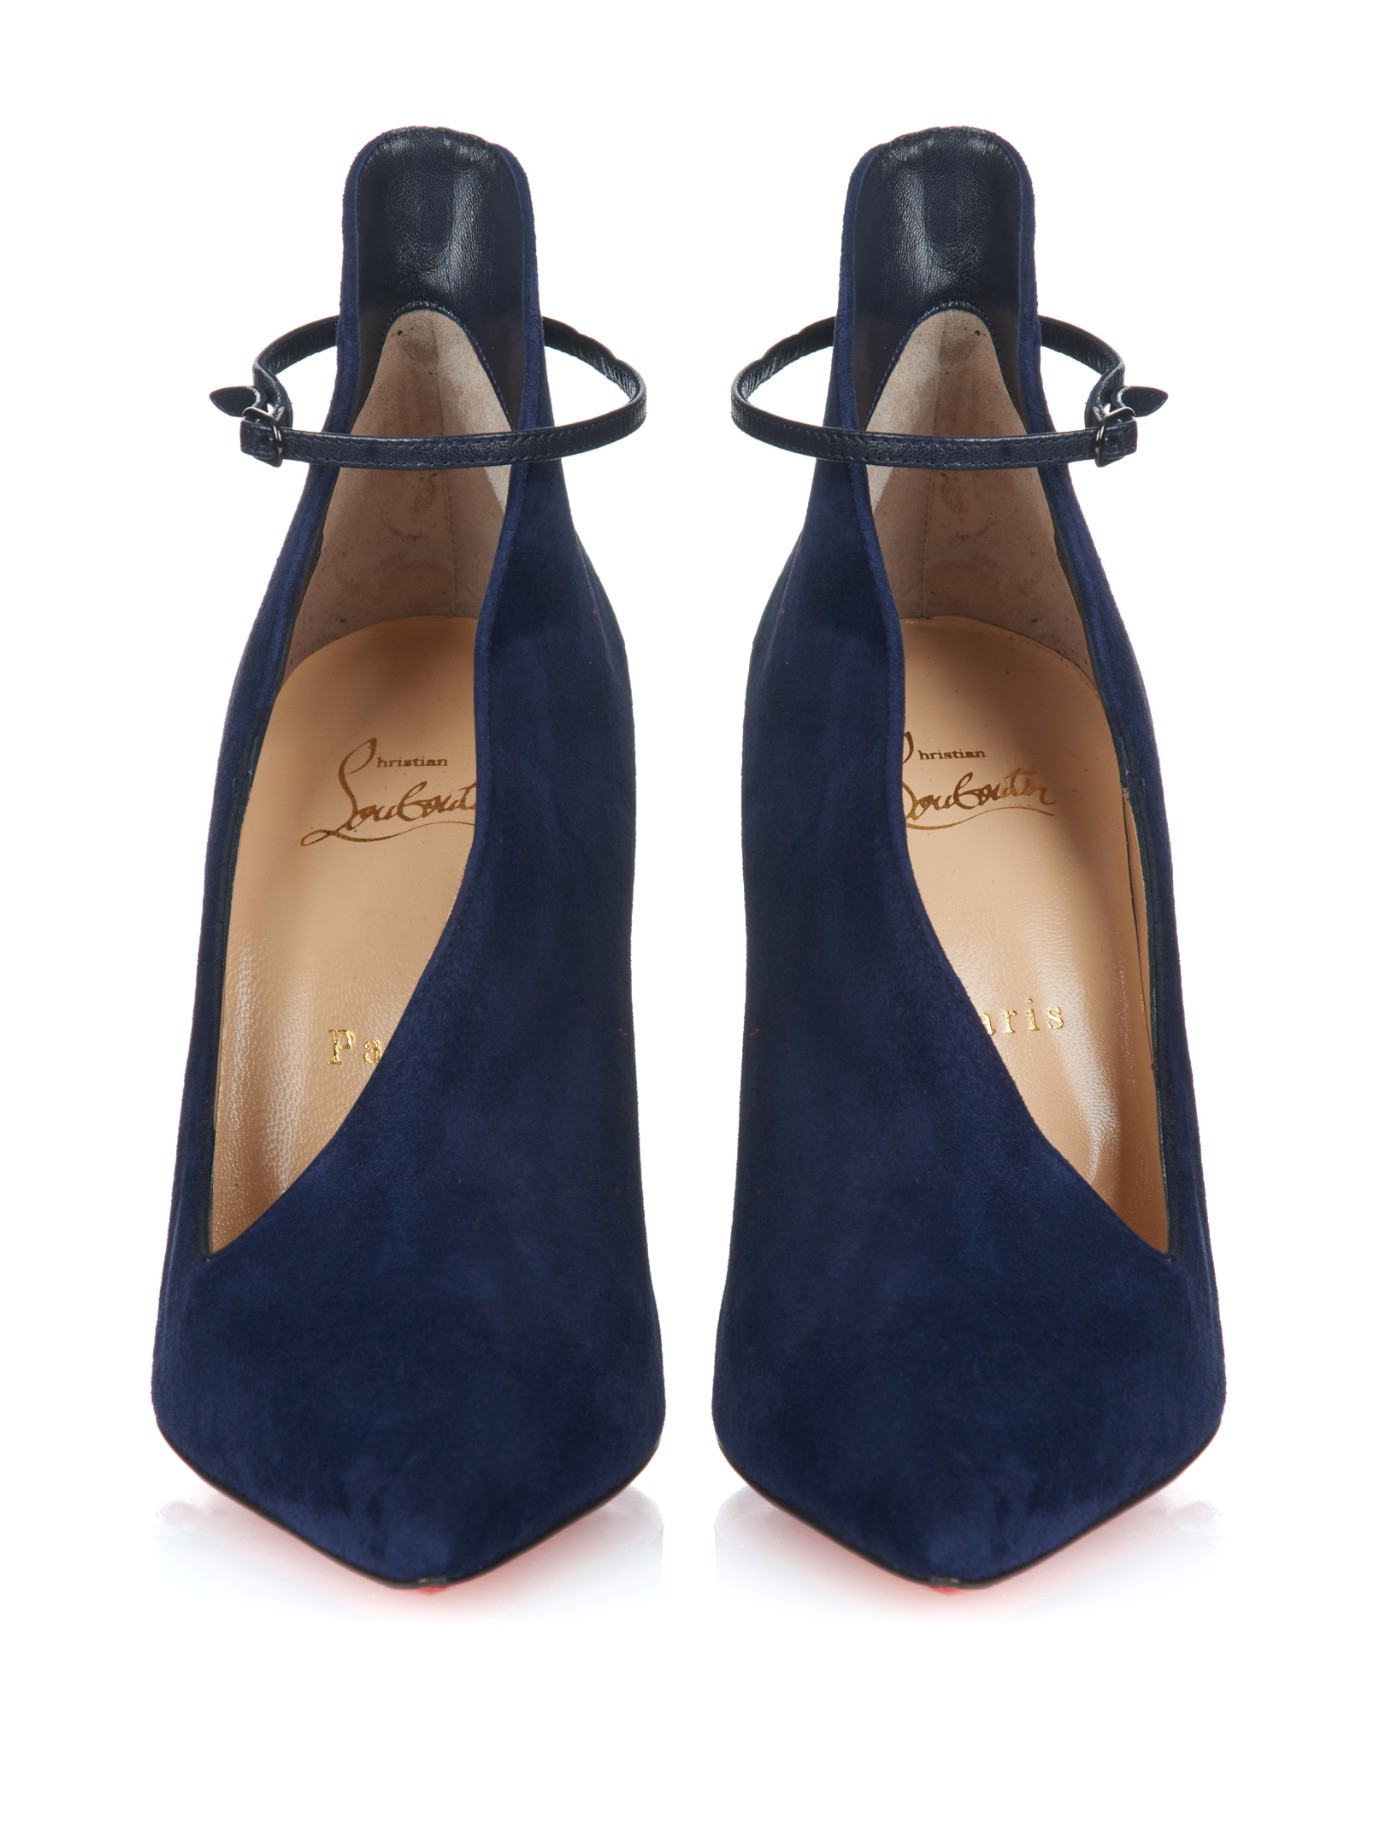 Christian Louboutin Vampydoly Suede Pumps in Blue - Lyst